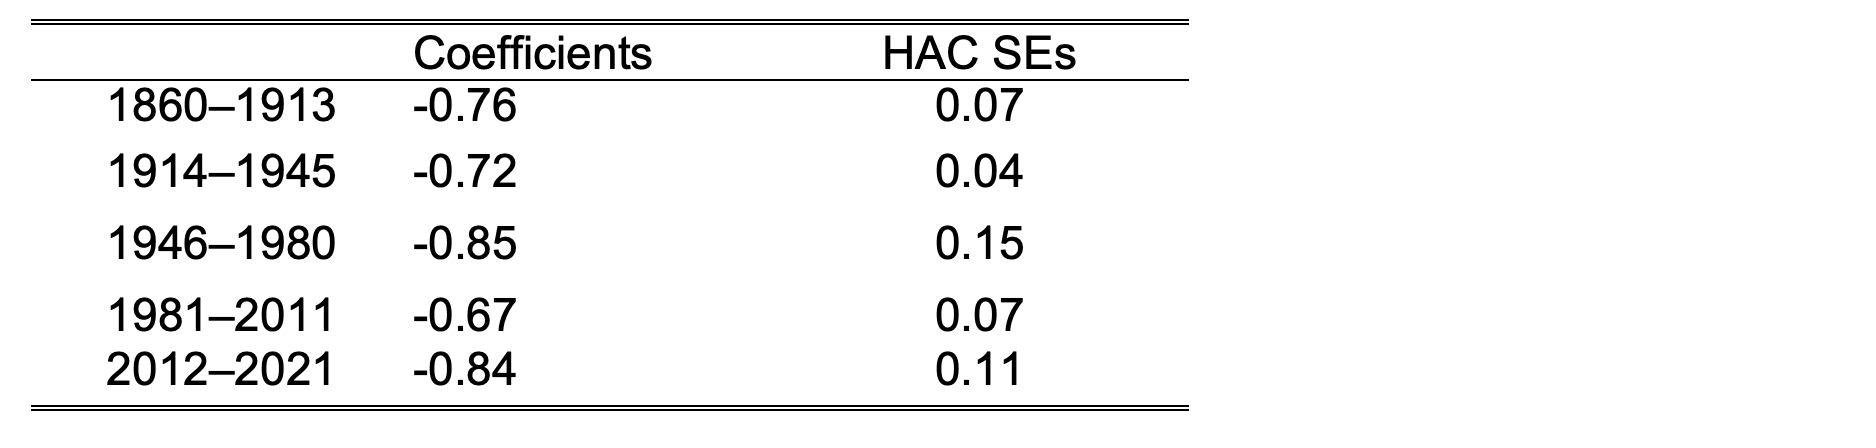 Table A2 Coefficient estimates for the unemployment rate in the subsample real-wage regressions with HAC standard errors